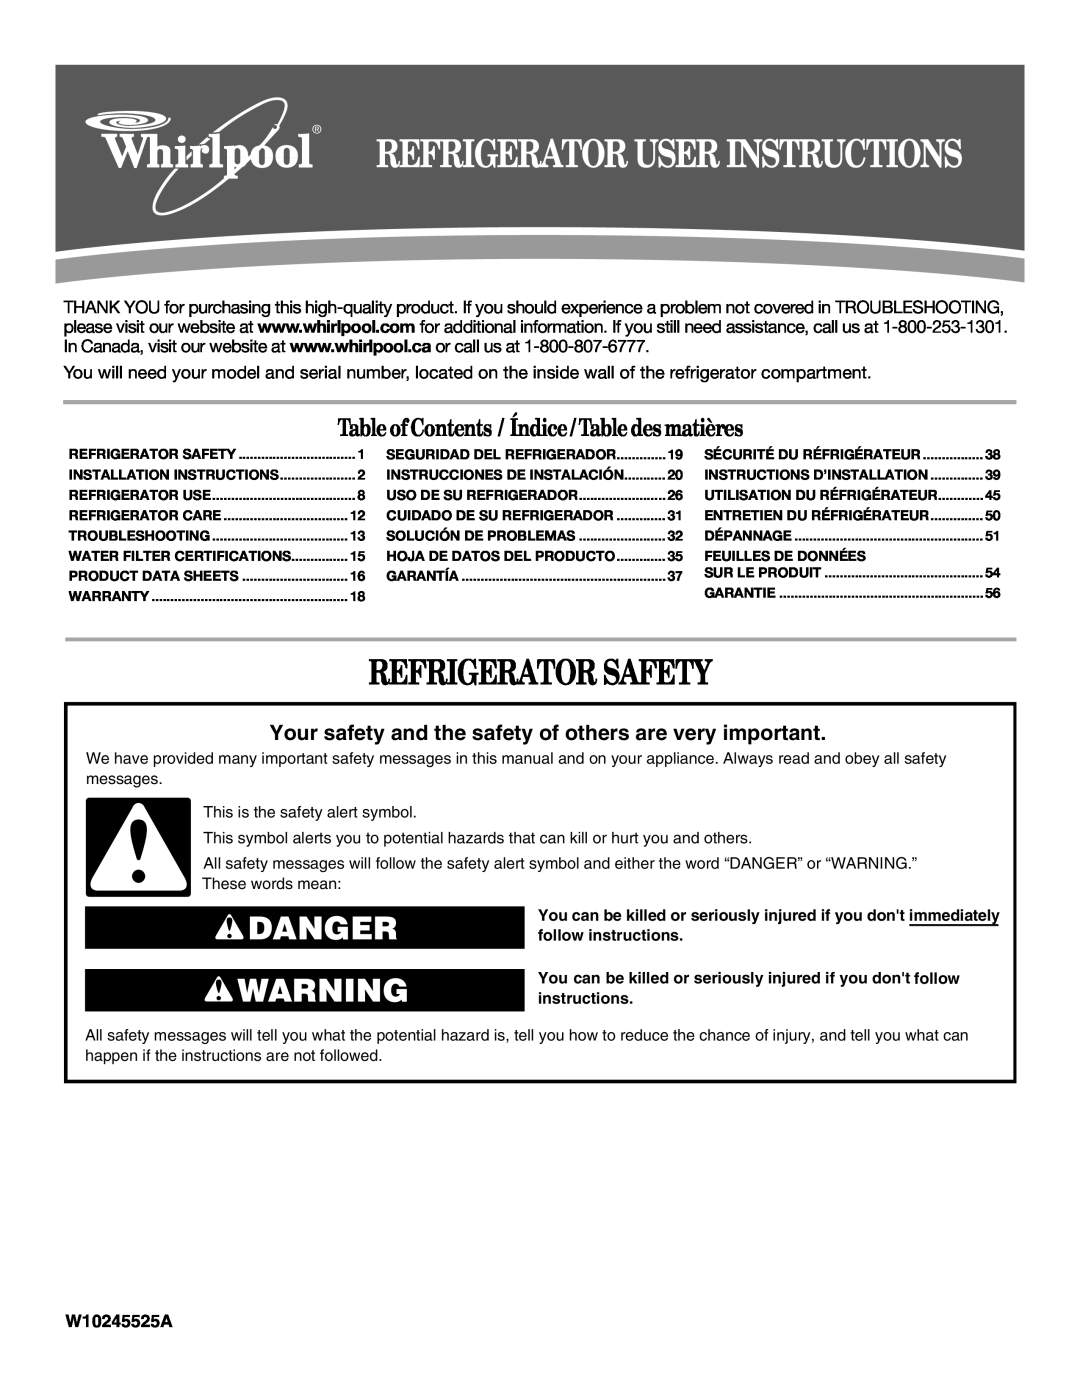 Whirlpool W10245525A installation instructions Refrigerator Safety, Danger, Table ofContents / Índice / Table des matières 